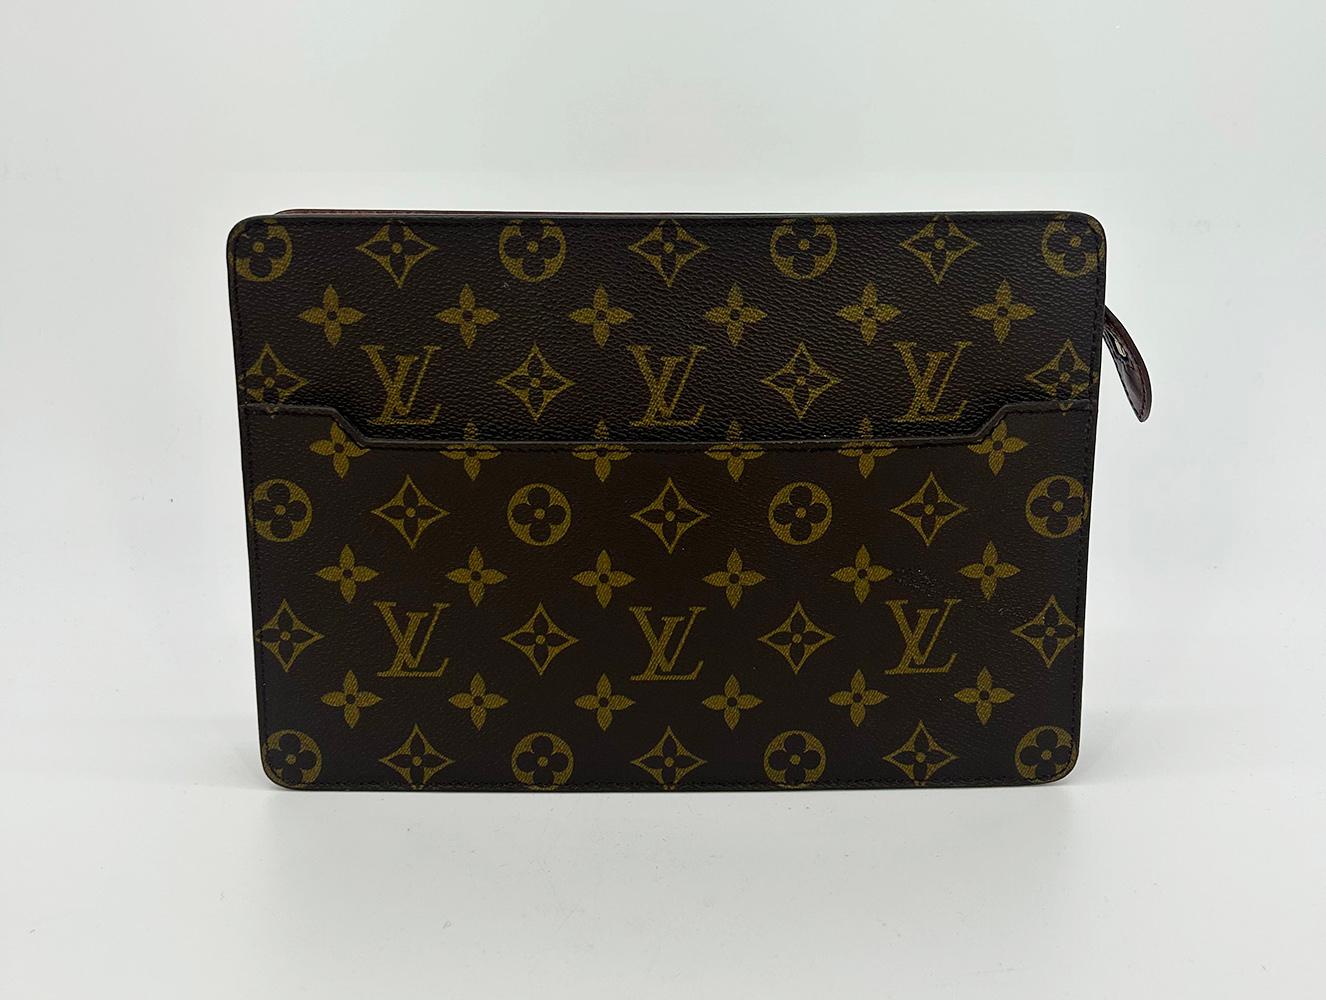 LOUIS VUITTON Pochette Homme clutch bag in excellent condition. Monogram canvas with front slit pocket and gold hardware. Top zip closure opens to a tan vuittonite interior. Excellent condition. No stains smells or scuffs. Clean corners edges and